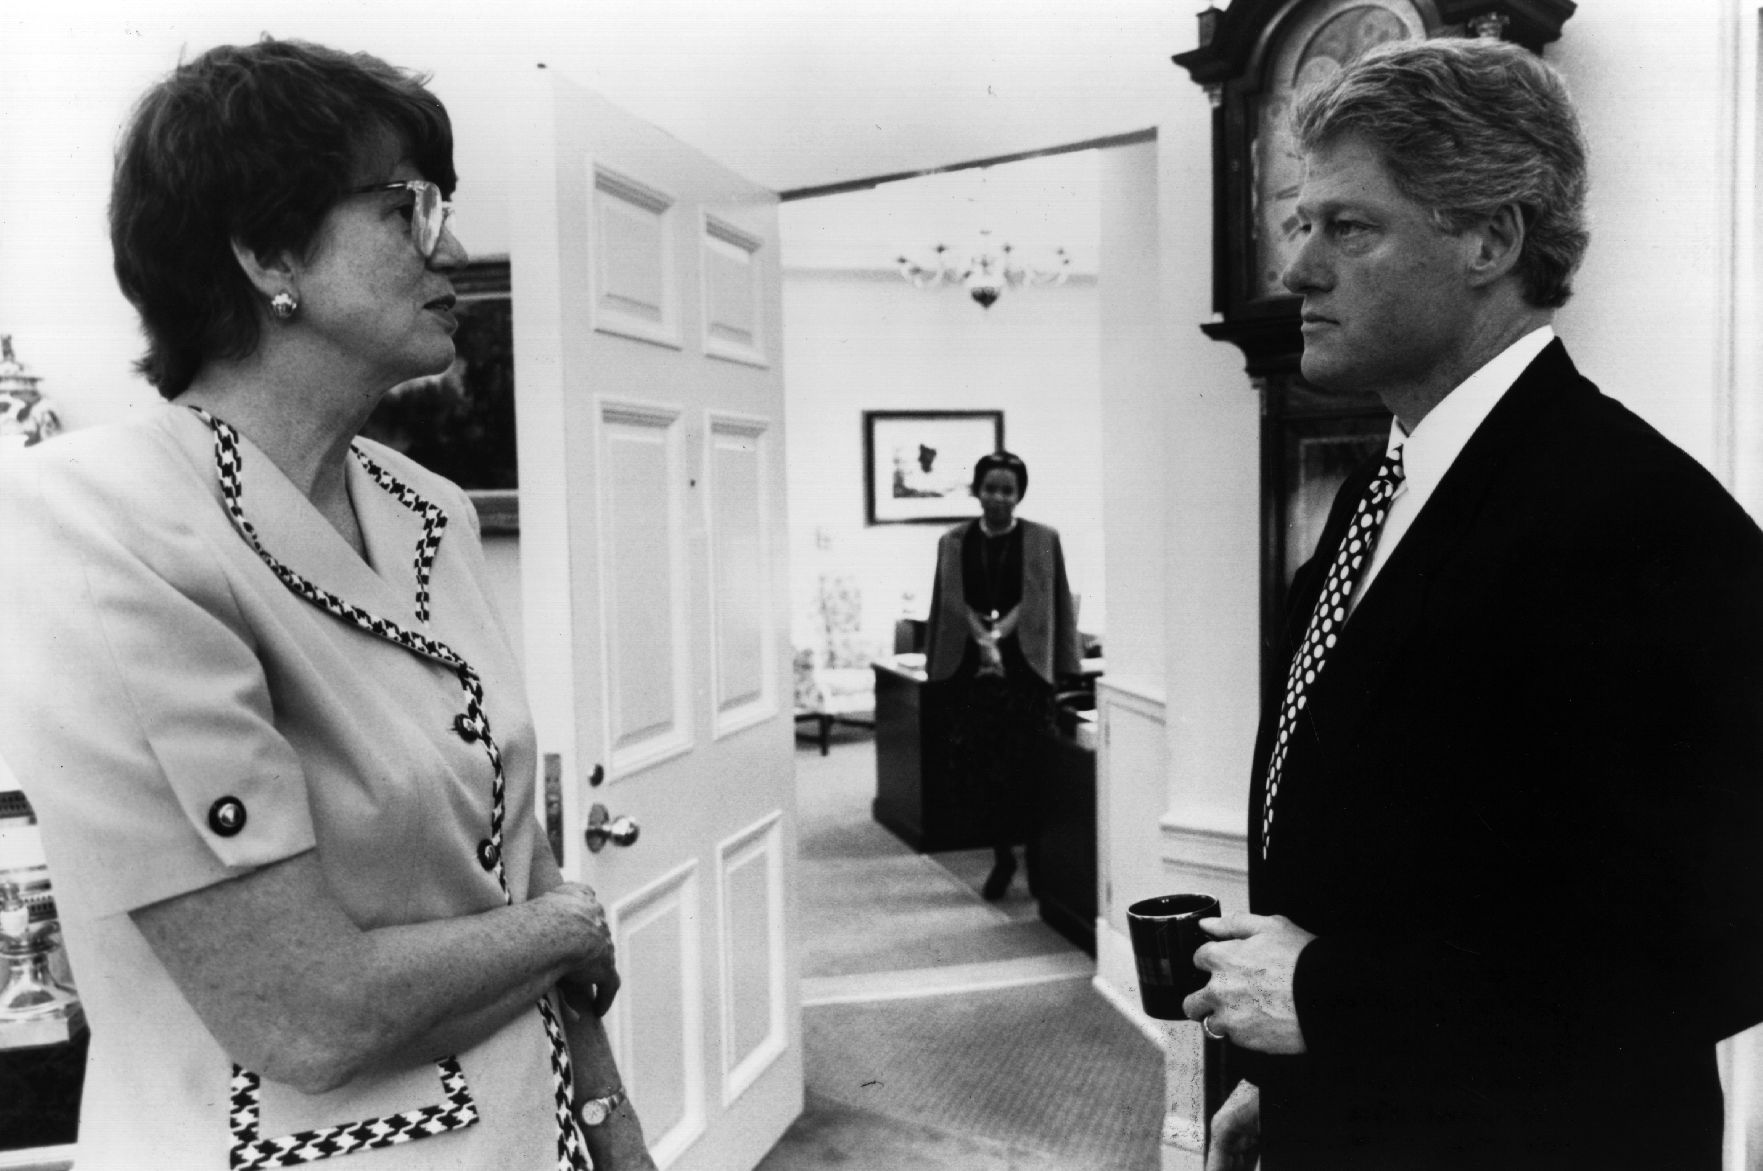 Attorney General Janet Reno and President Bill Clinton in the White House, Washington DC, in 1993. (Consolidated News Pictures—Getty Images)